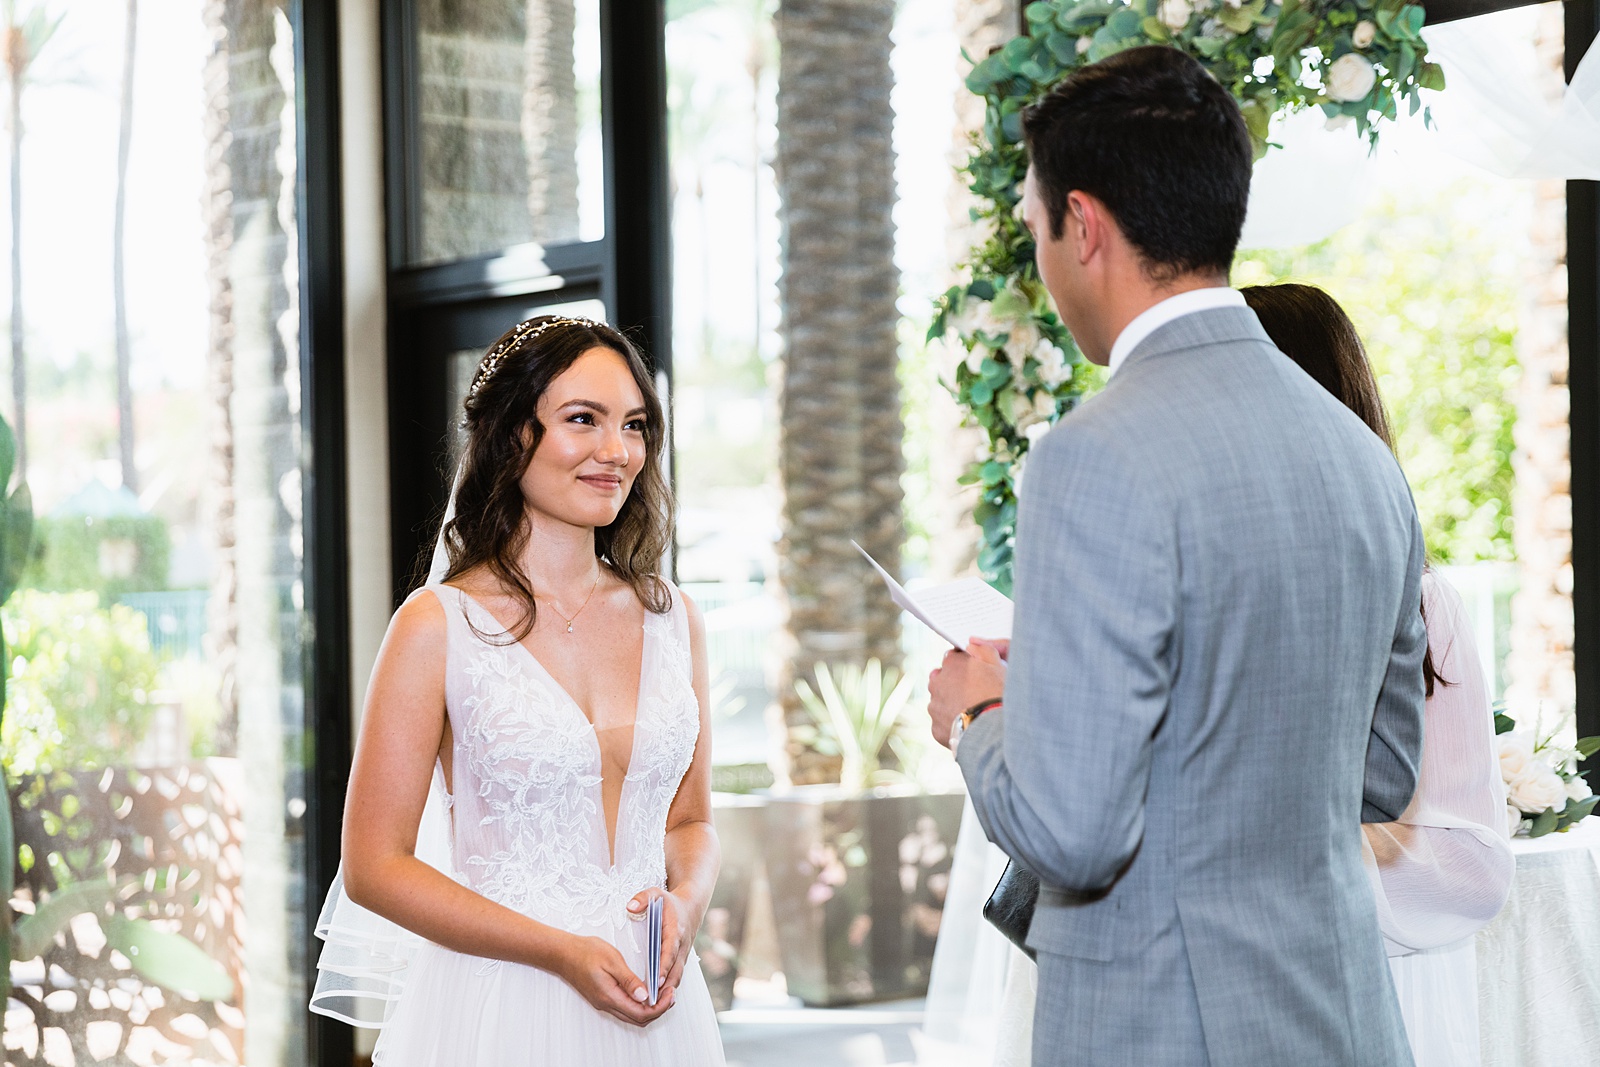 Bride looking at her groom during their wedding ceremony at Hyatt Regency Scottsdale Resort & Spa At Gainey Ranch by Scottdsale wedding photographer PMA Photography.